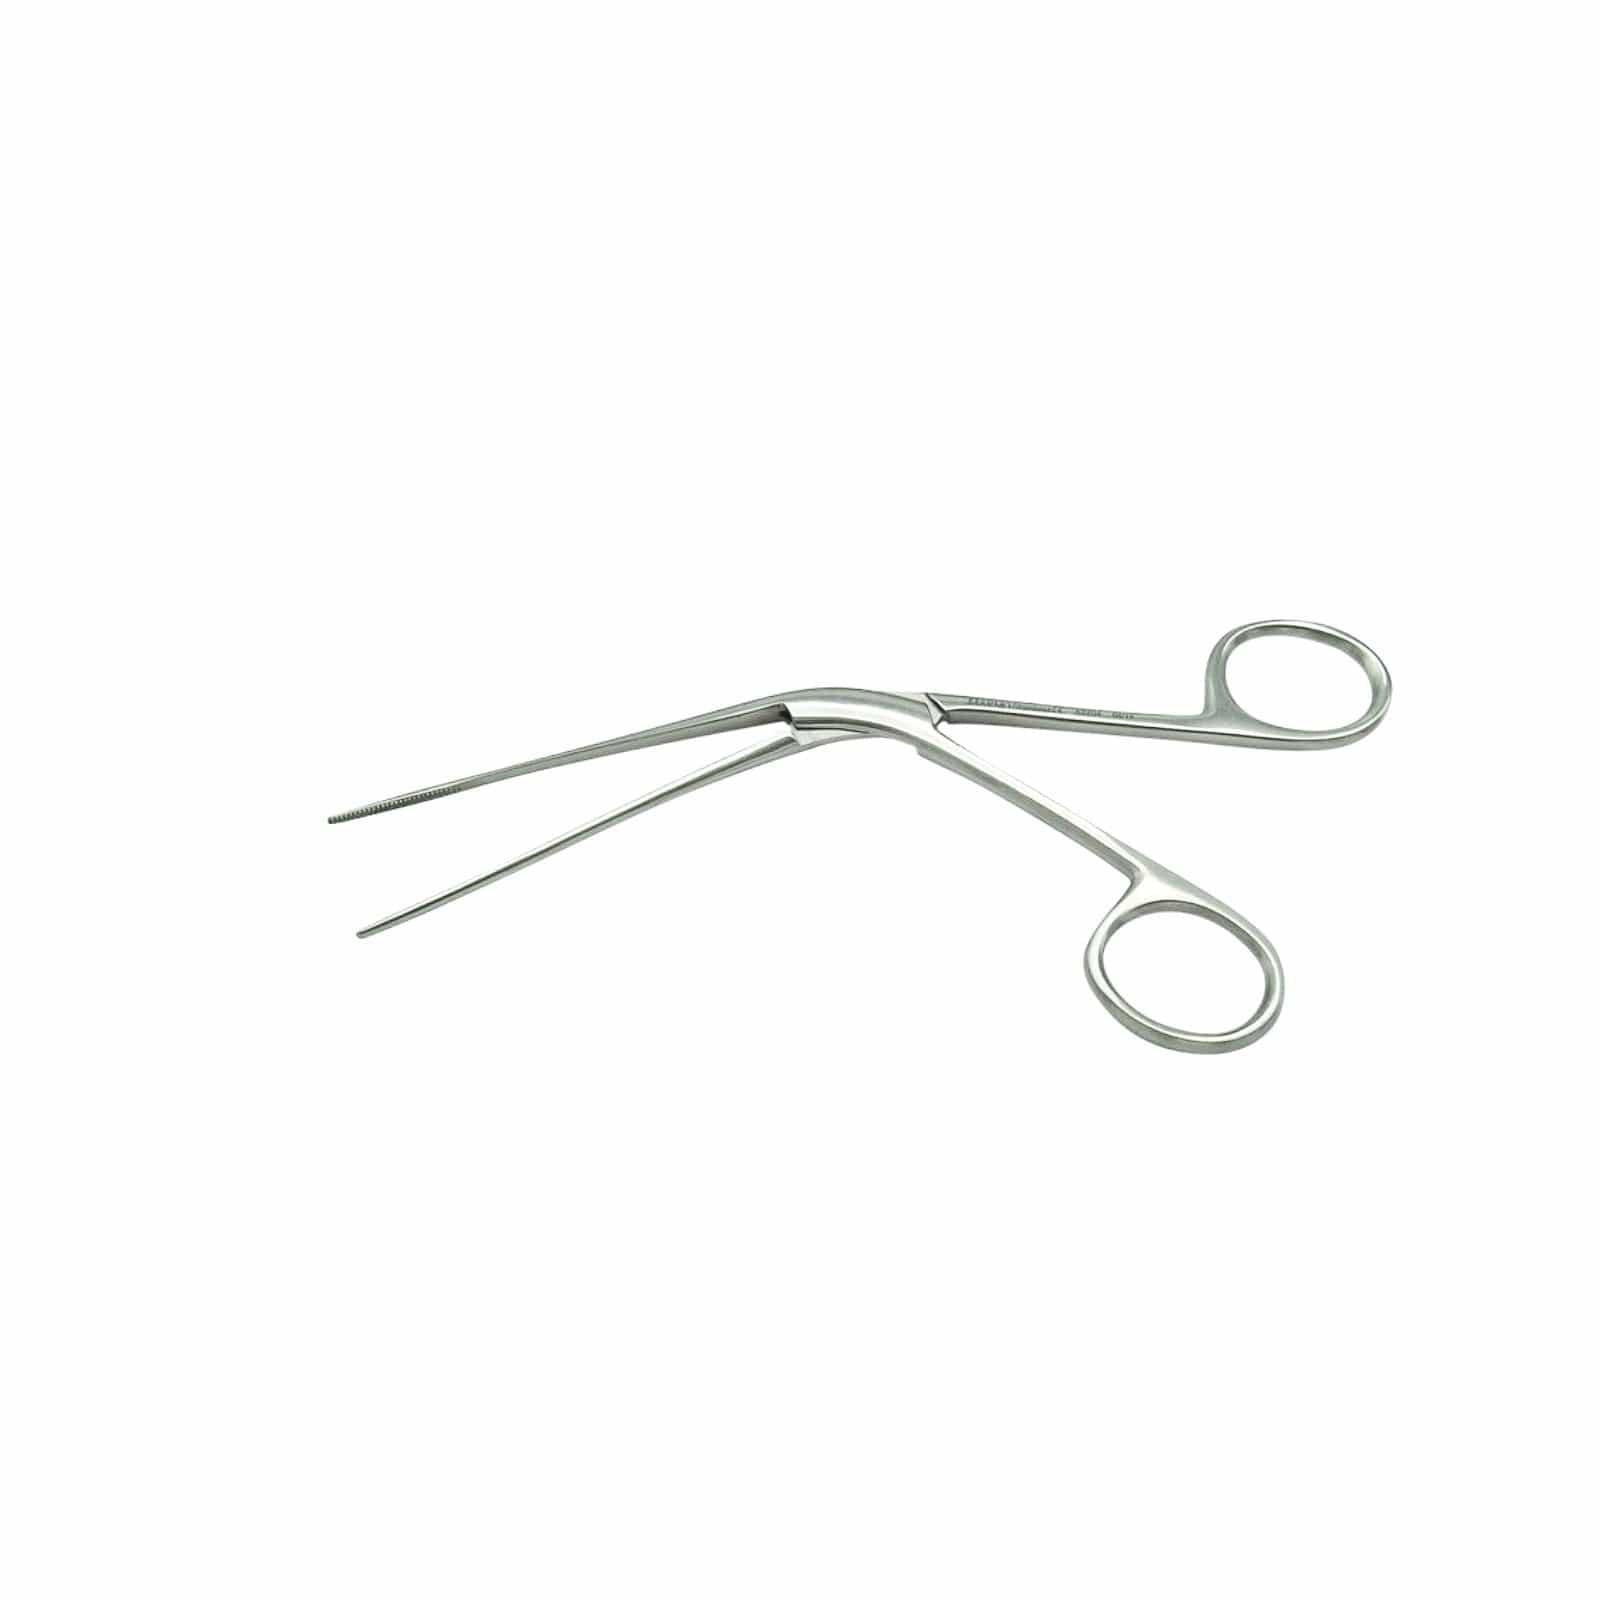 Armo Surgical Instruments 16cm Armo Tilley Aural/Ear Forceps